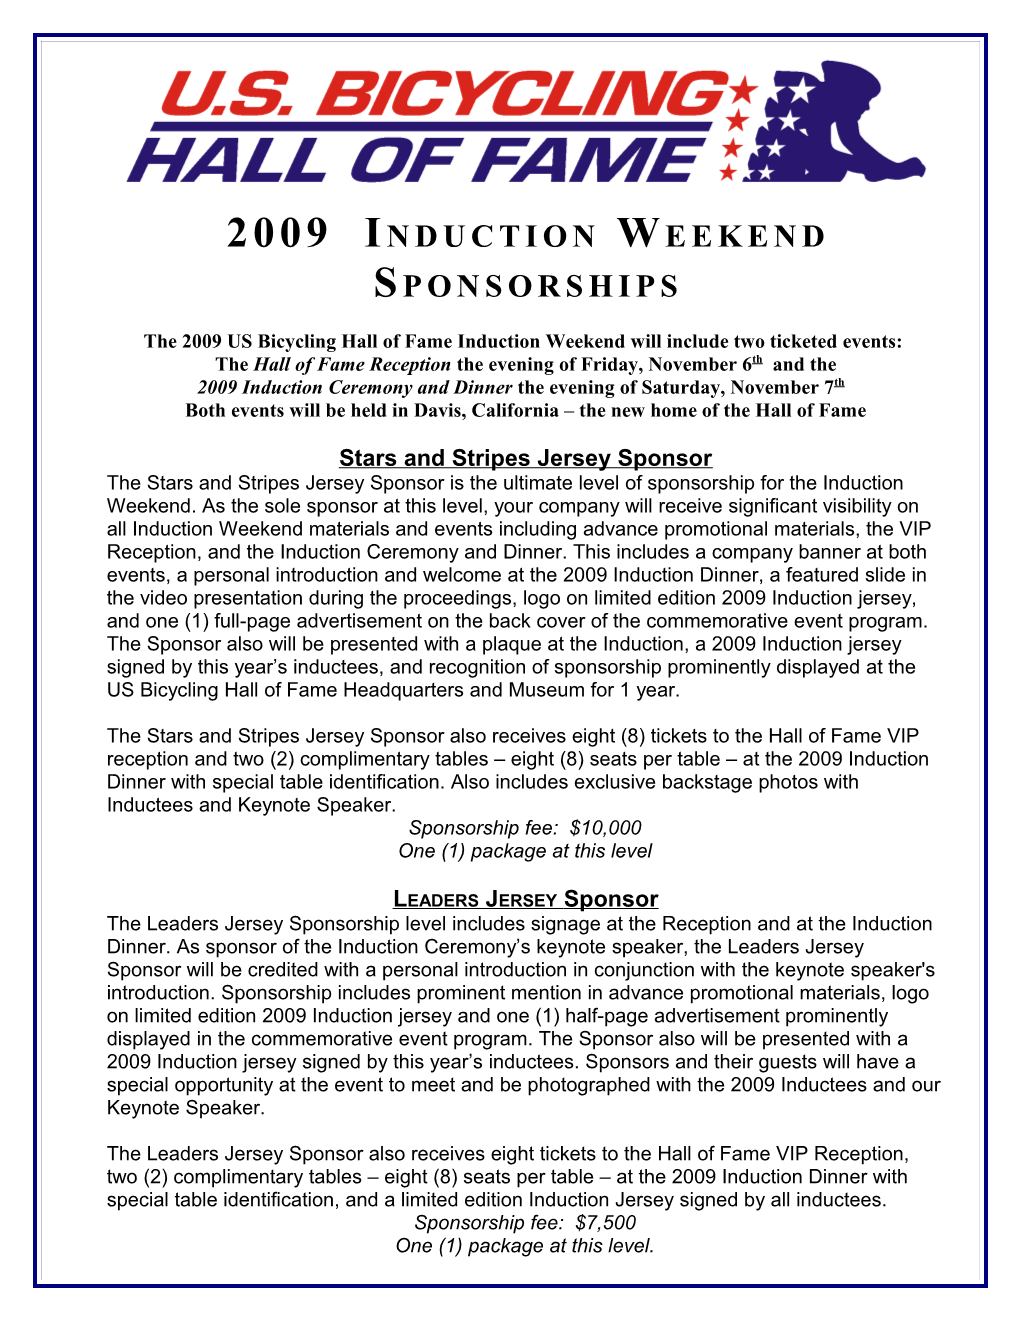 The 2009 US Bicycling Hall of Fame Induction Weekend Will Include Two Ticketed Events